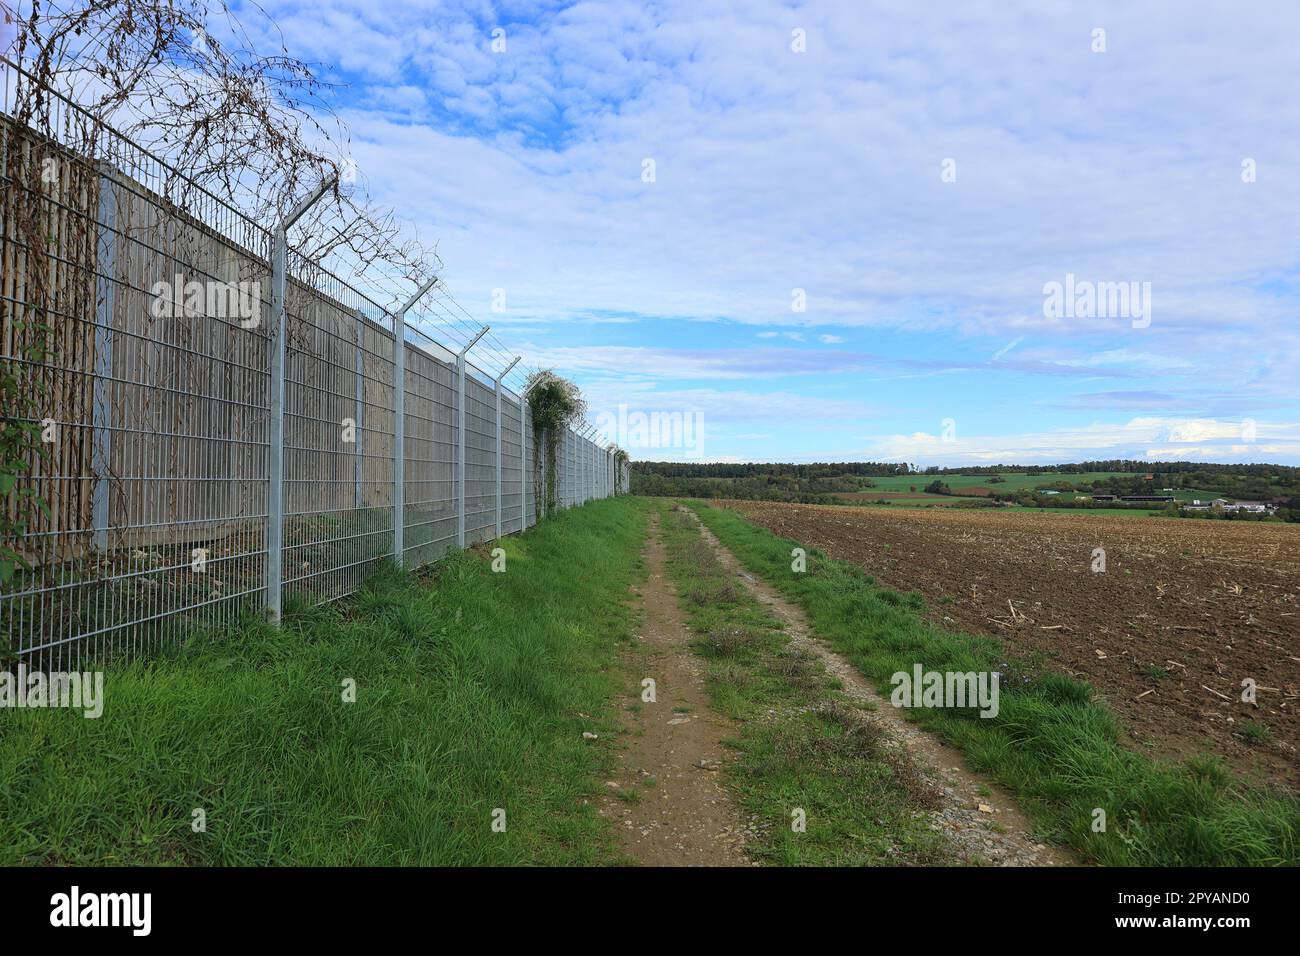 Dirt road runs parallel to the fence of a property Stock Photo